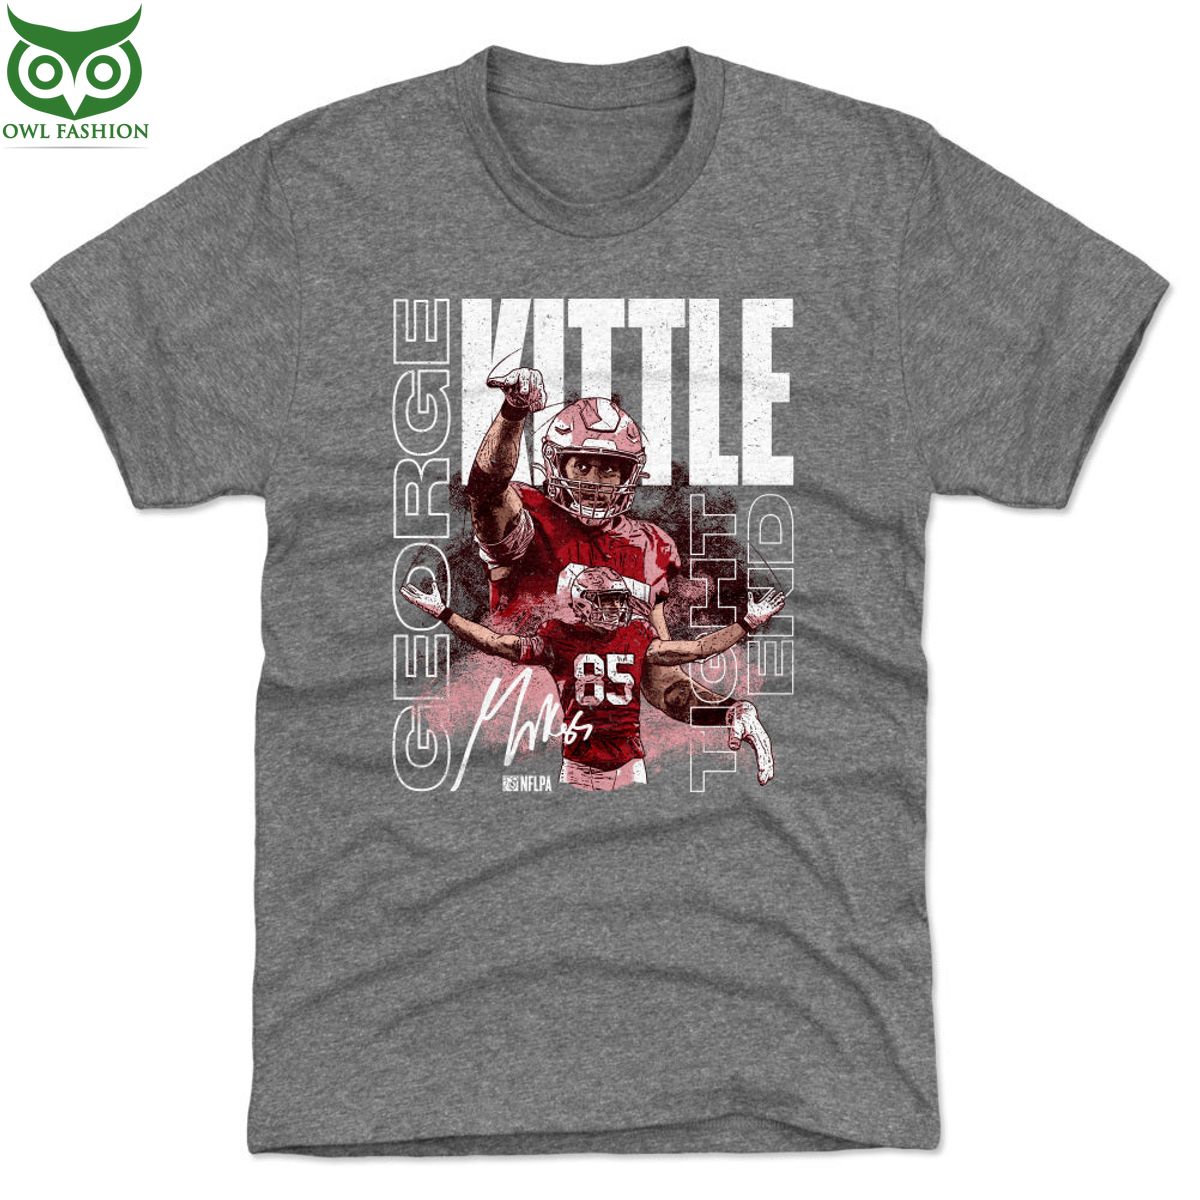 George Kittle t shirt Tight End The details are intricately executed.